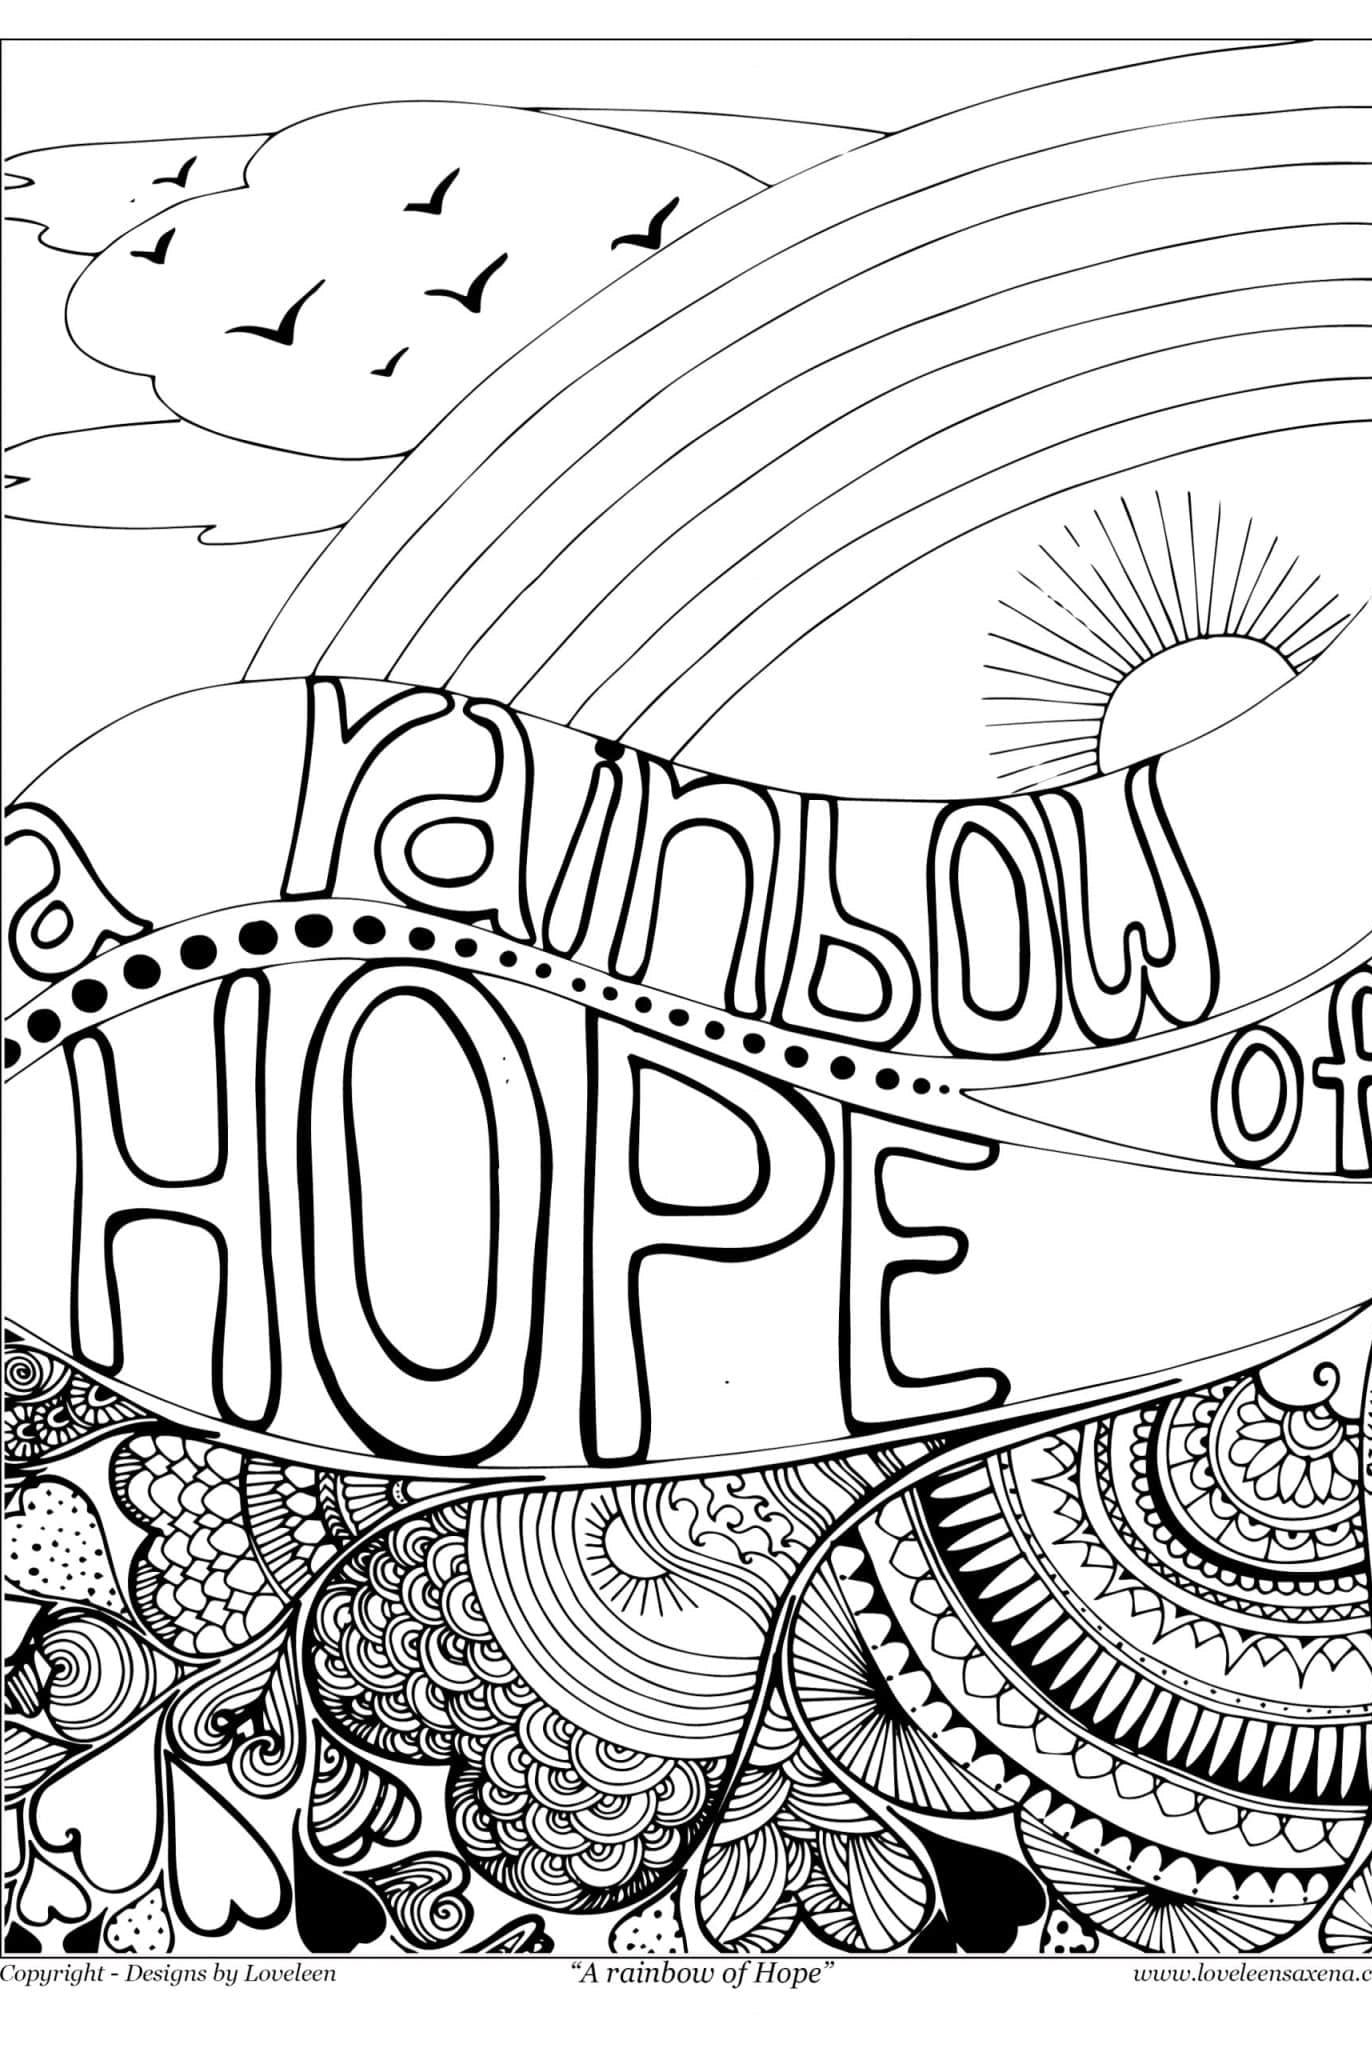 Rainbow of Hope - Racial Justice